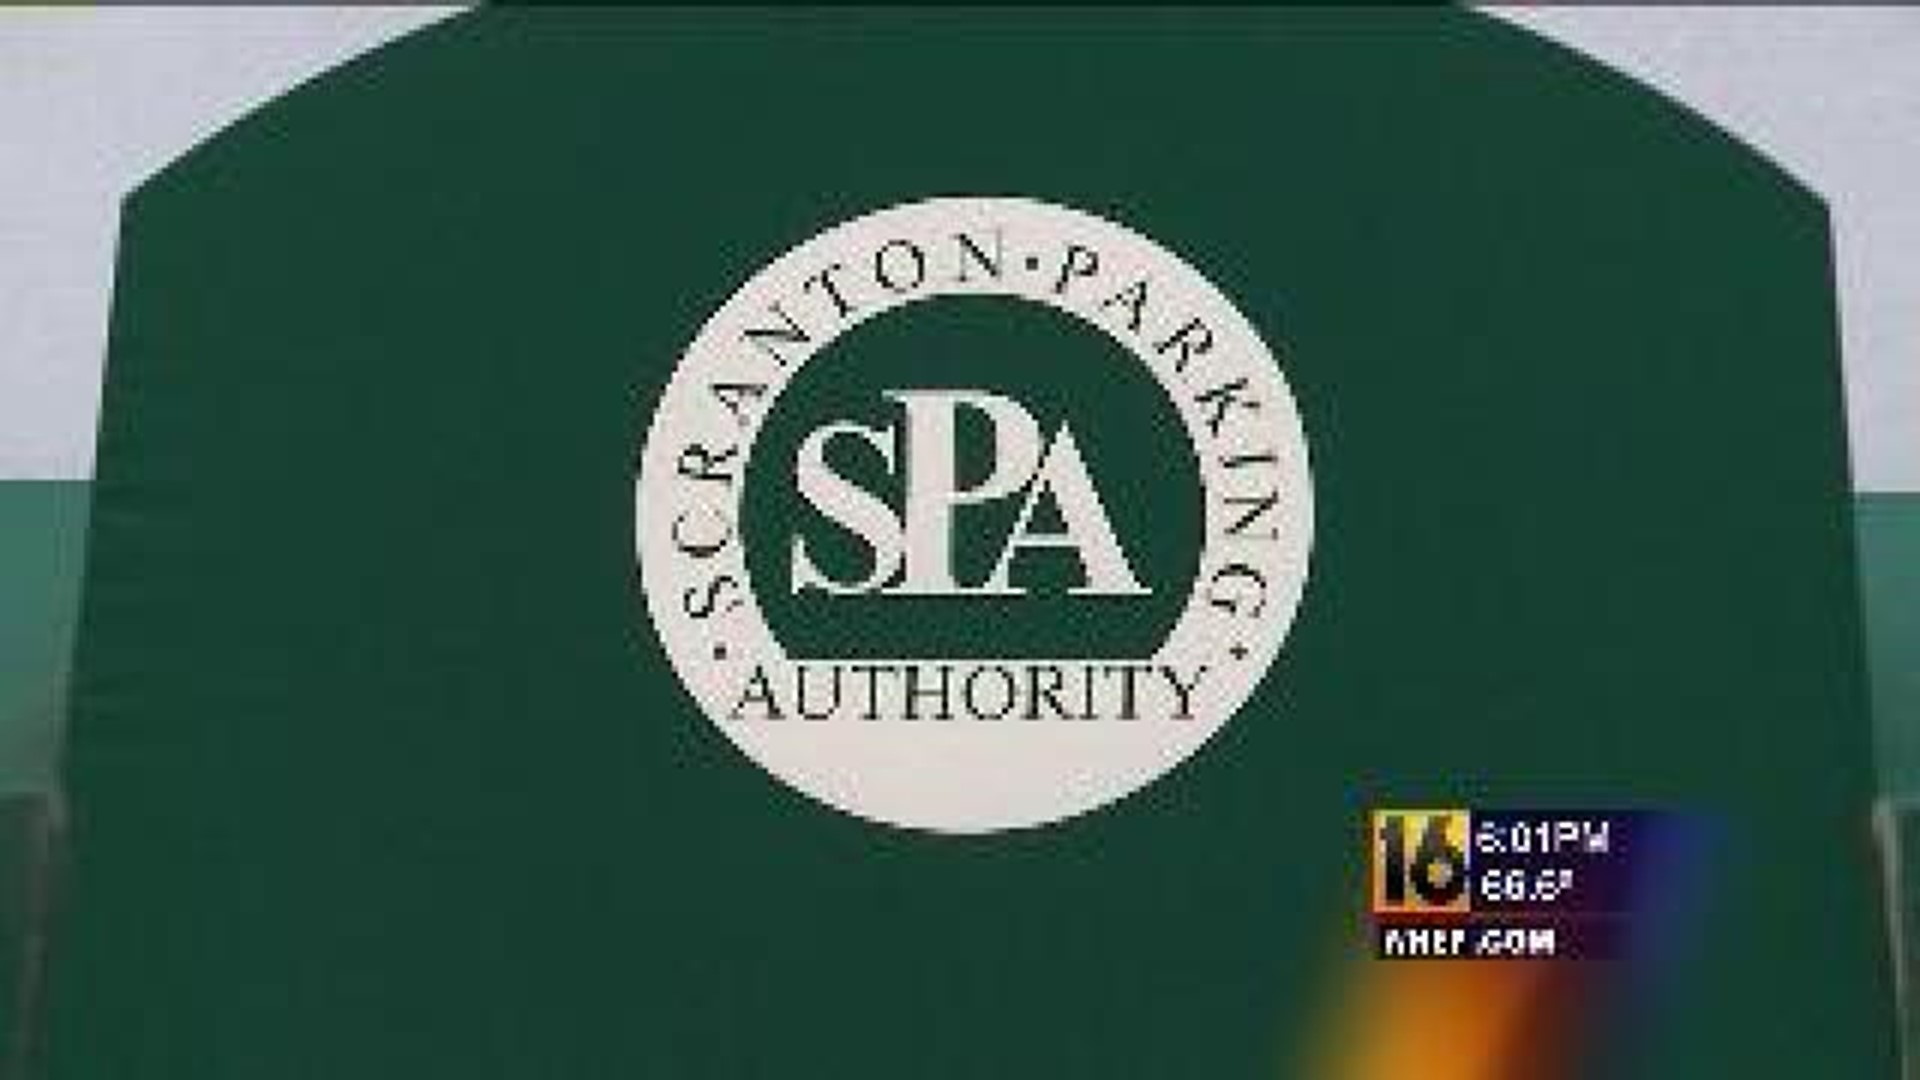 Mayor and City Council at Odds Over Parking Authority